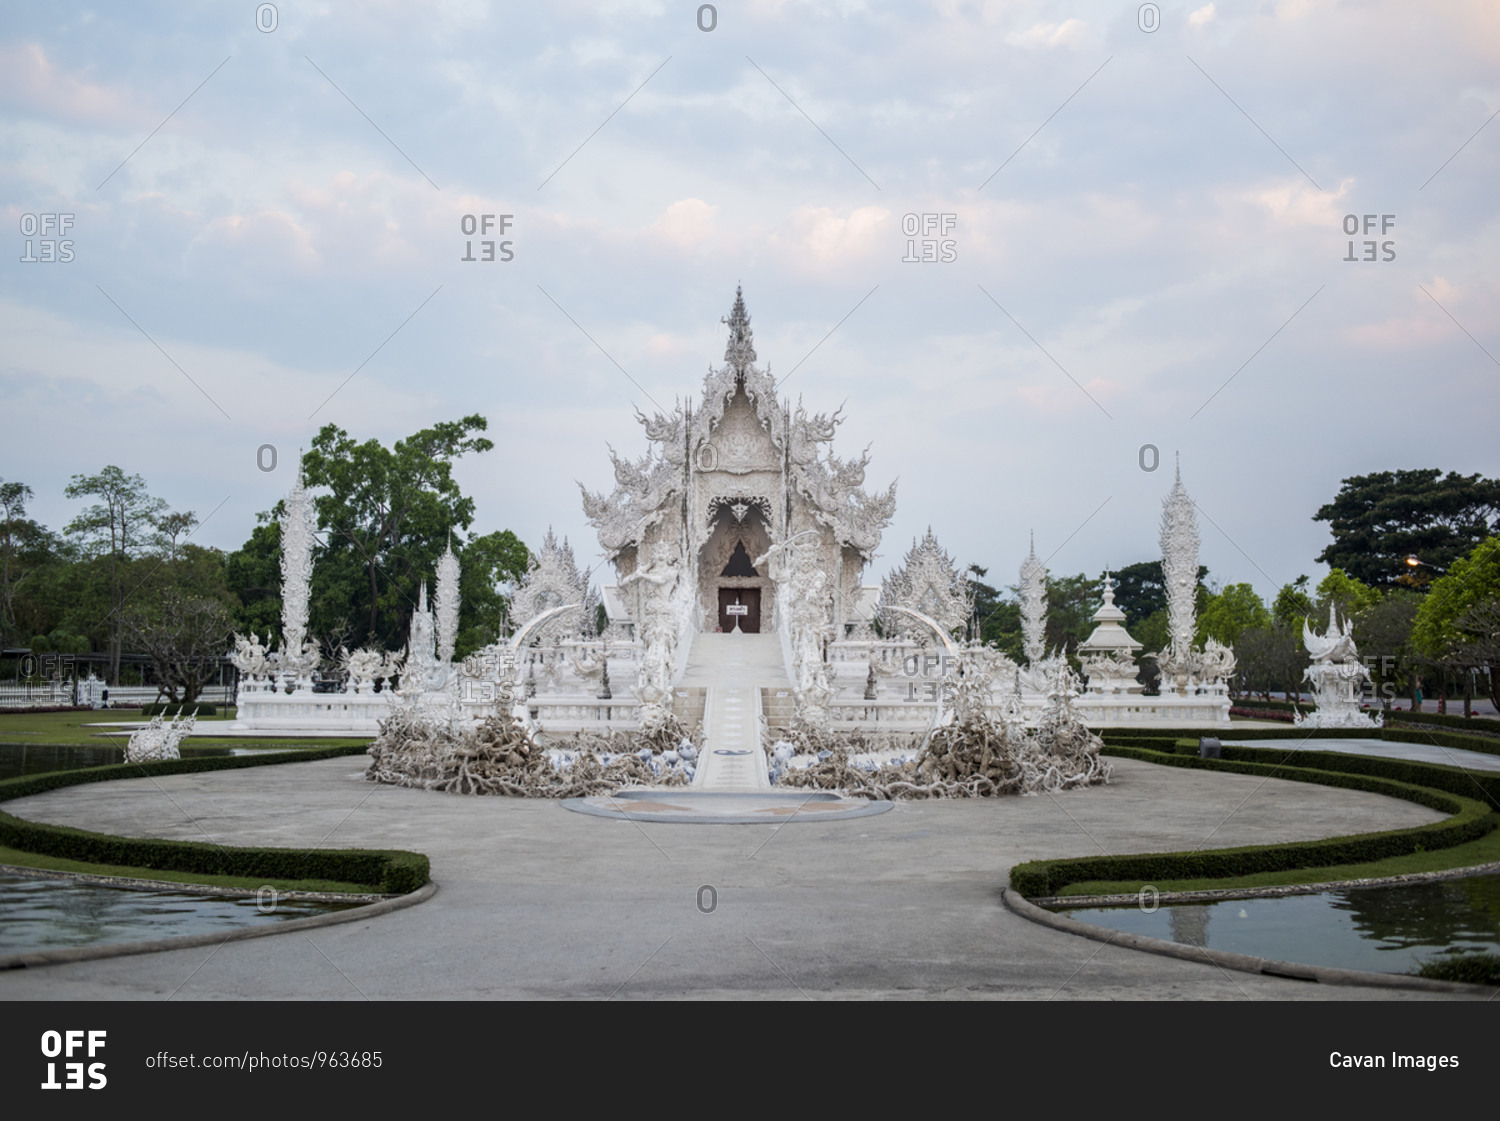 The White temple of Wat Rong Khun in Chiang Rai, Thailand.